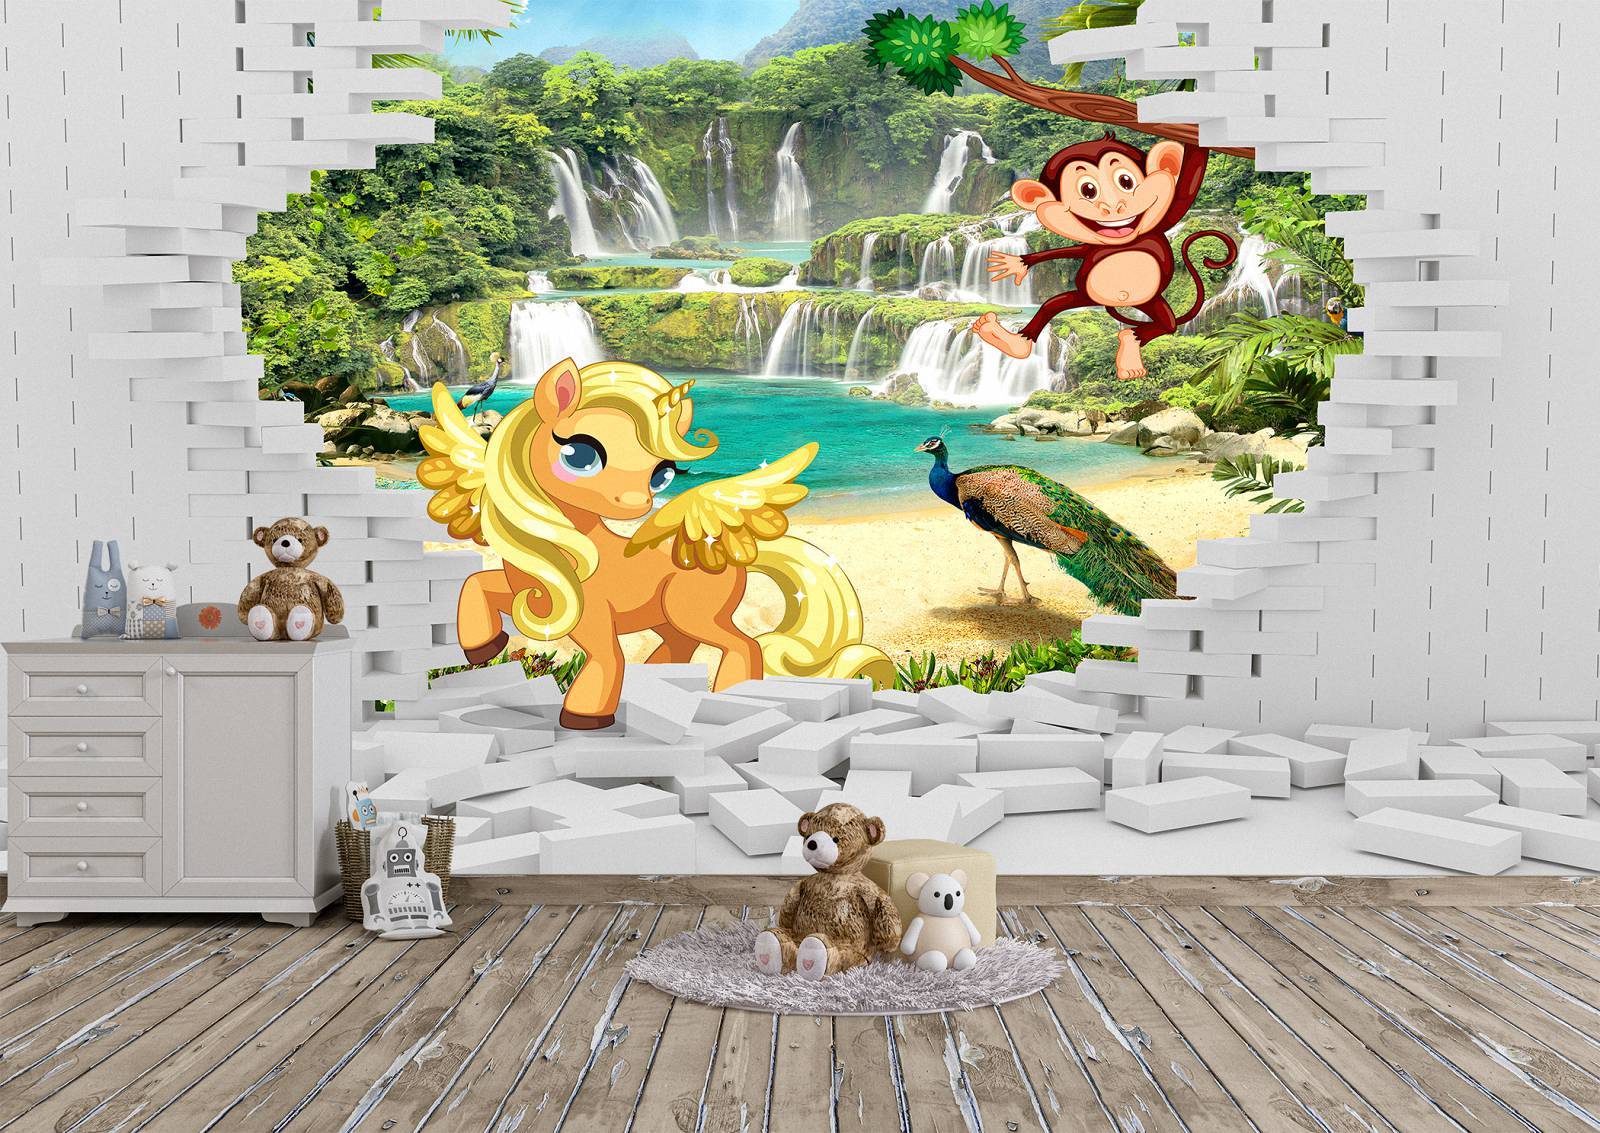 Animals Coming Out the Wall Mural Photo Wallpaper UV Print Decal Art Décor